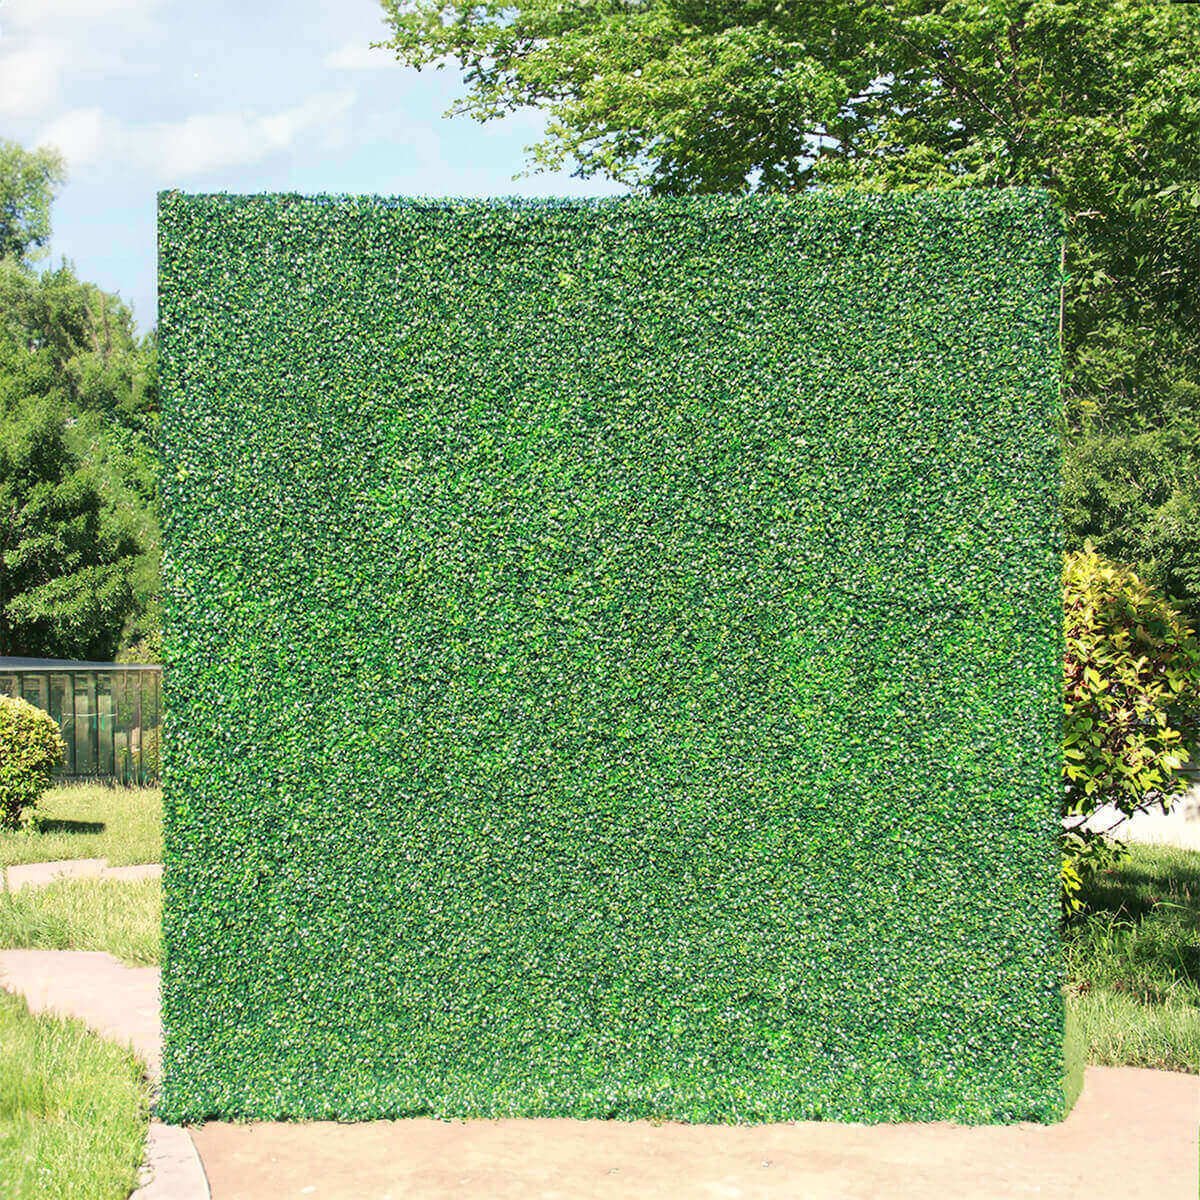 Green Hedge Wall Rental - Riverside Flower Wall Rental - Perfect Capture Booth | Photo Booth Rental.jpeg